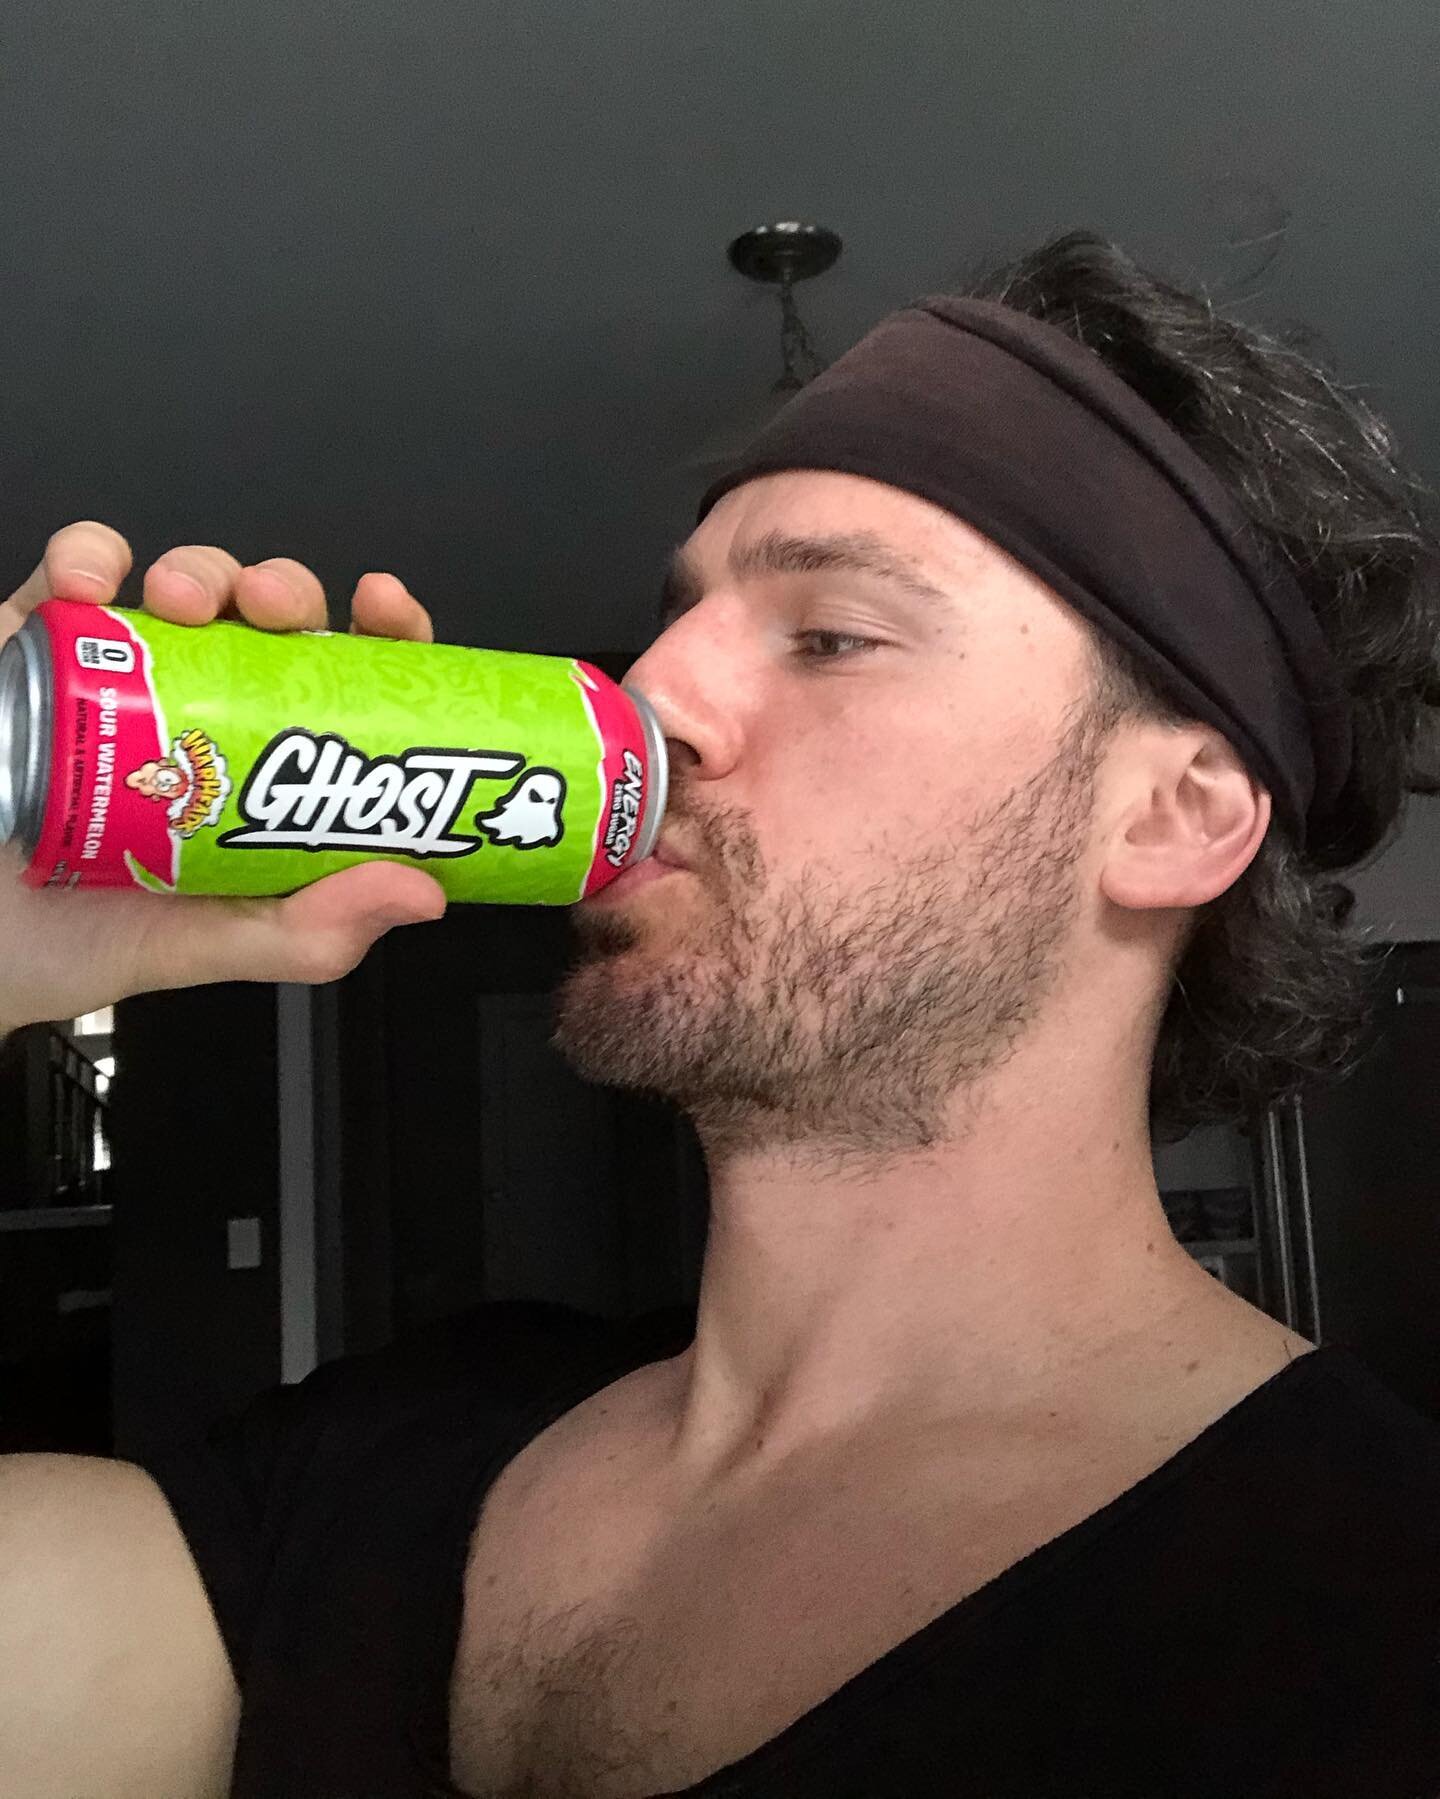 Workout today fuelled by a bit of food and this @ghostlifestyle @ghostlifestyleca energy drink. Tasty caffeine drink with zero sugar. Tastes like sour watermelon candy. Something about a carbonated pre that just takes me to the next level. #justtrain